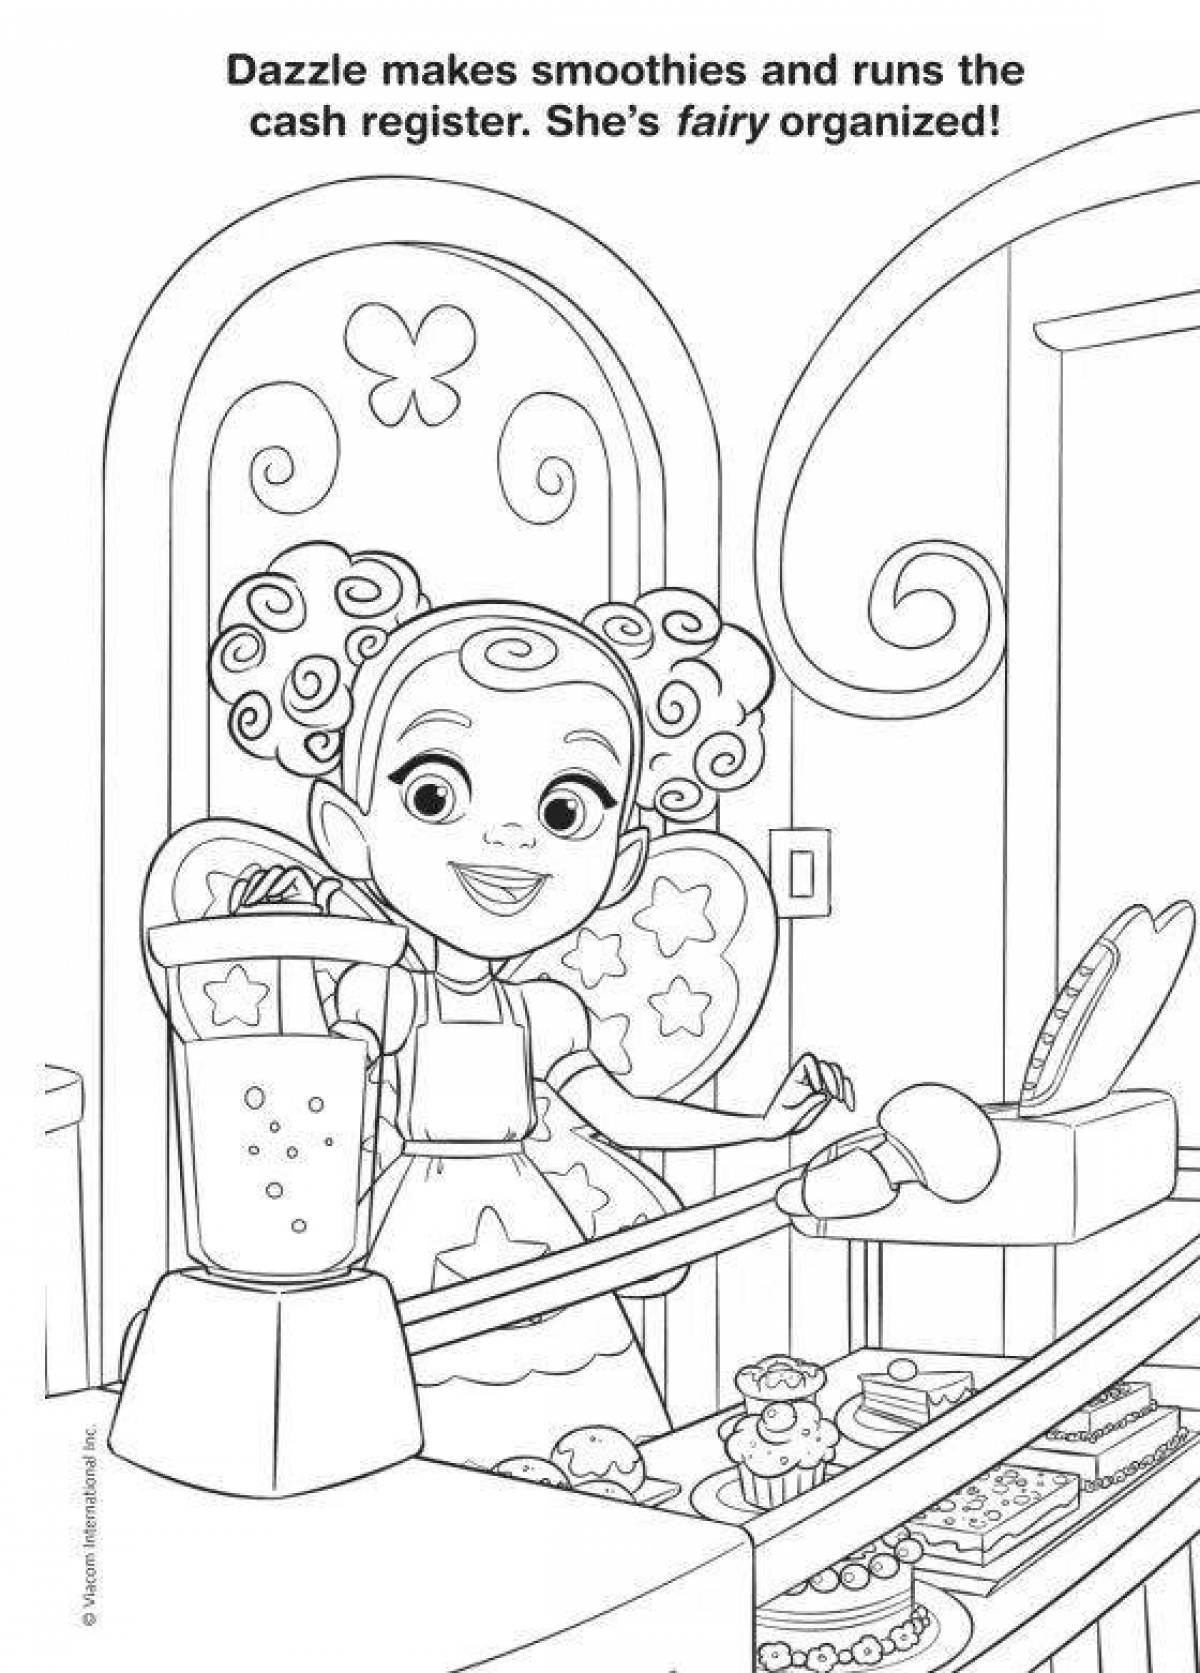 Charming butterbean cafe coloring book